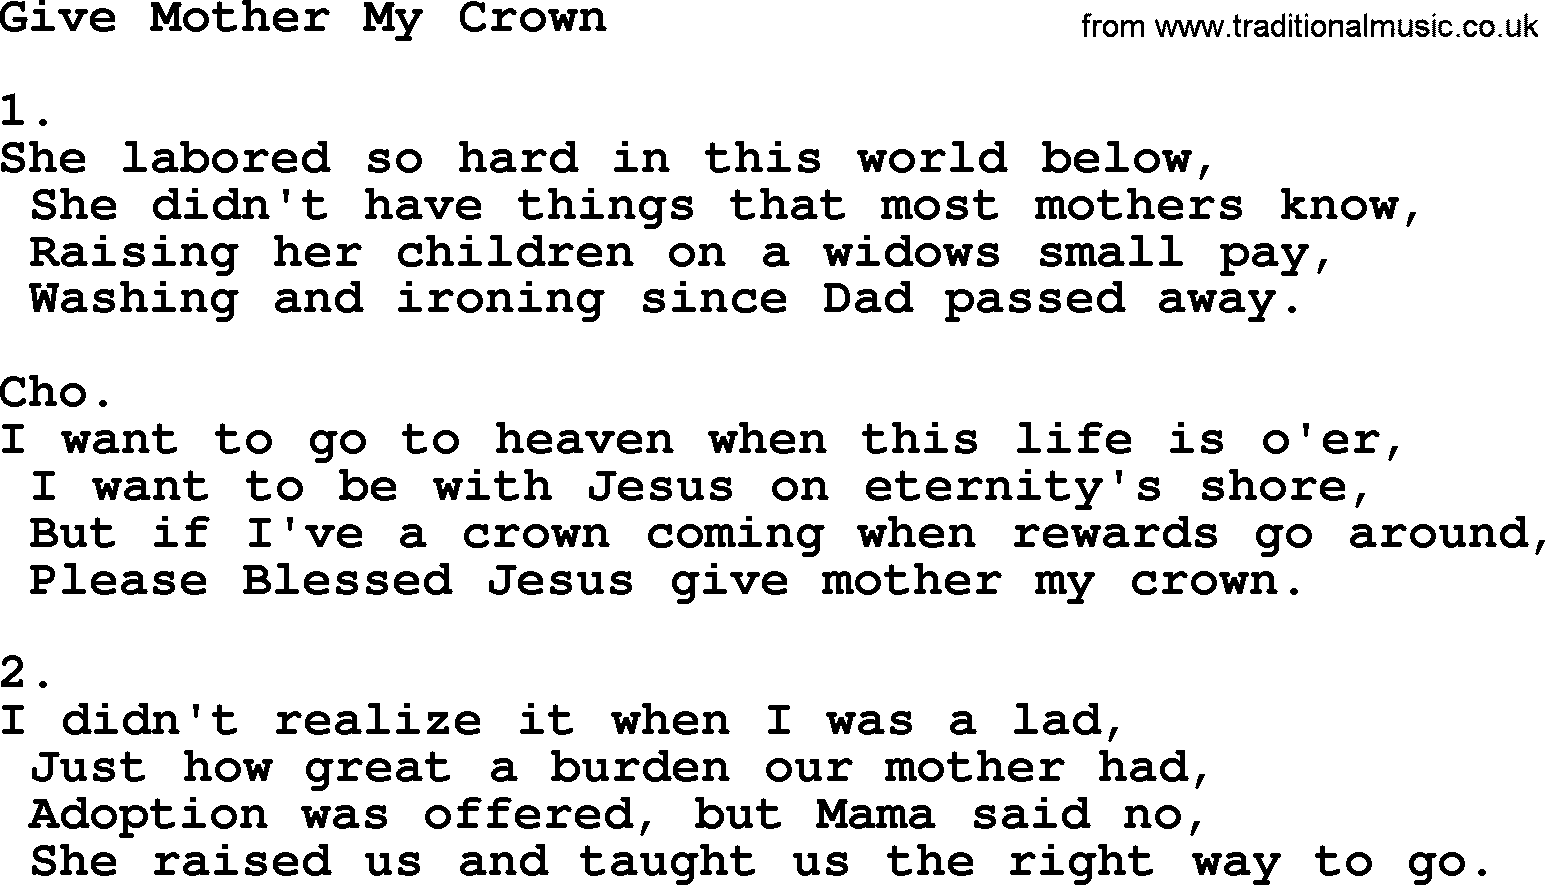 Apostolic & Pentecostal Hymns and Songs, Hymn: Give Mother My Crown lyrics and PDF